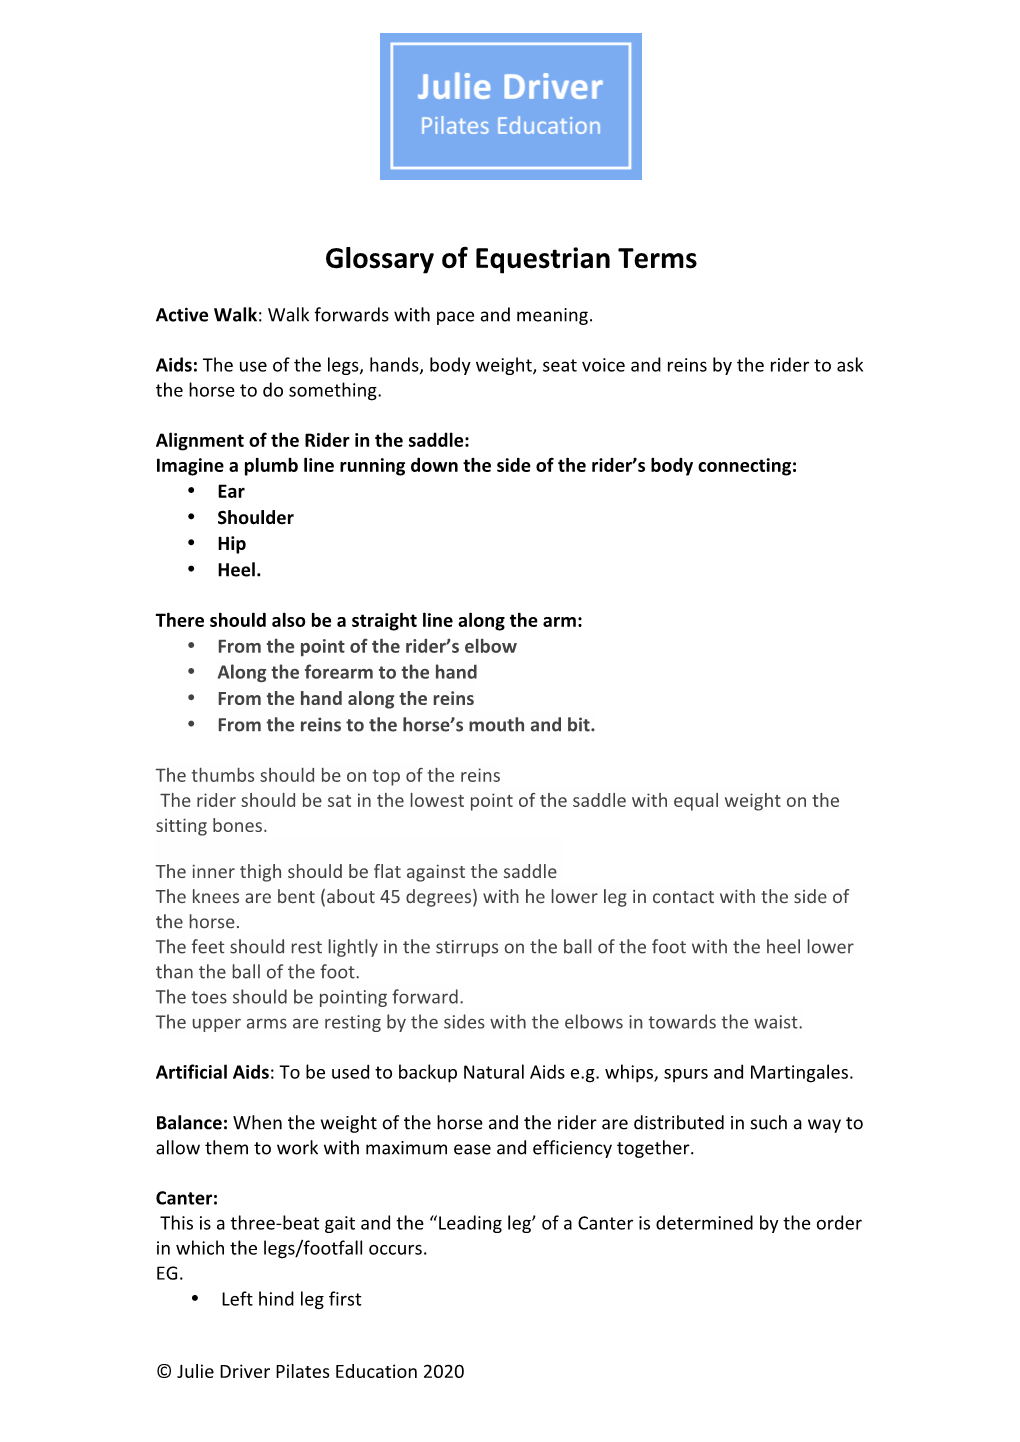 Glossary of Equestrian Terms